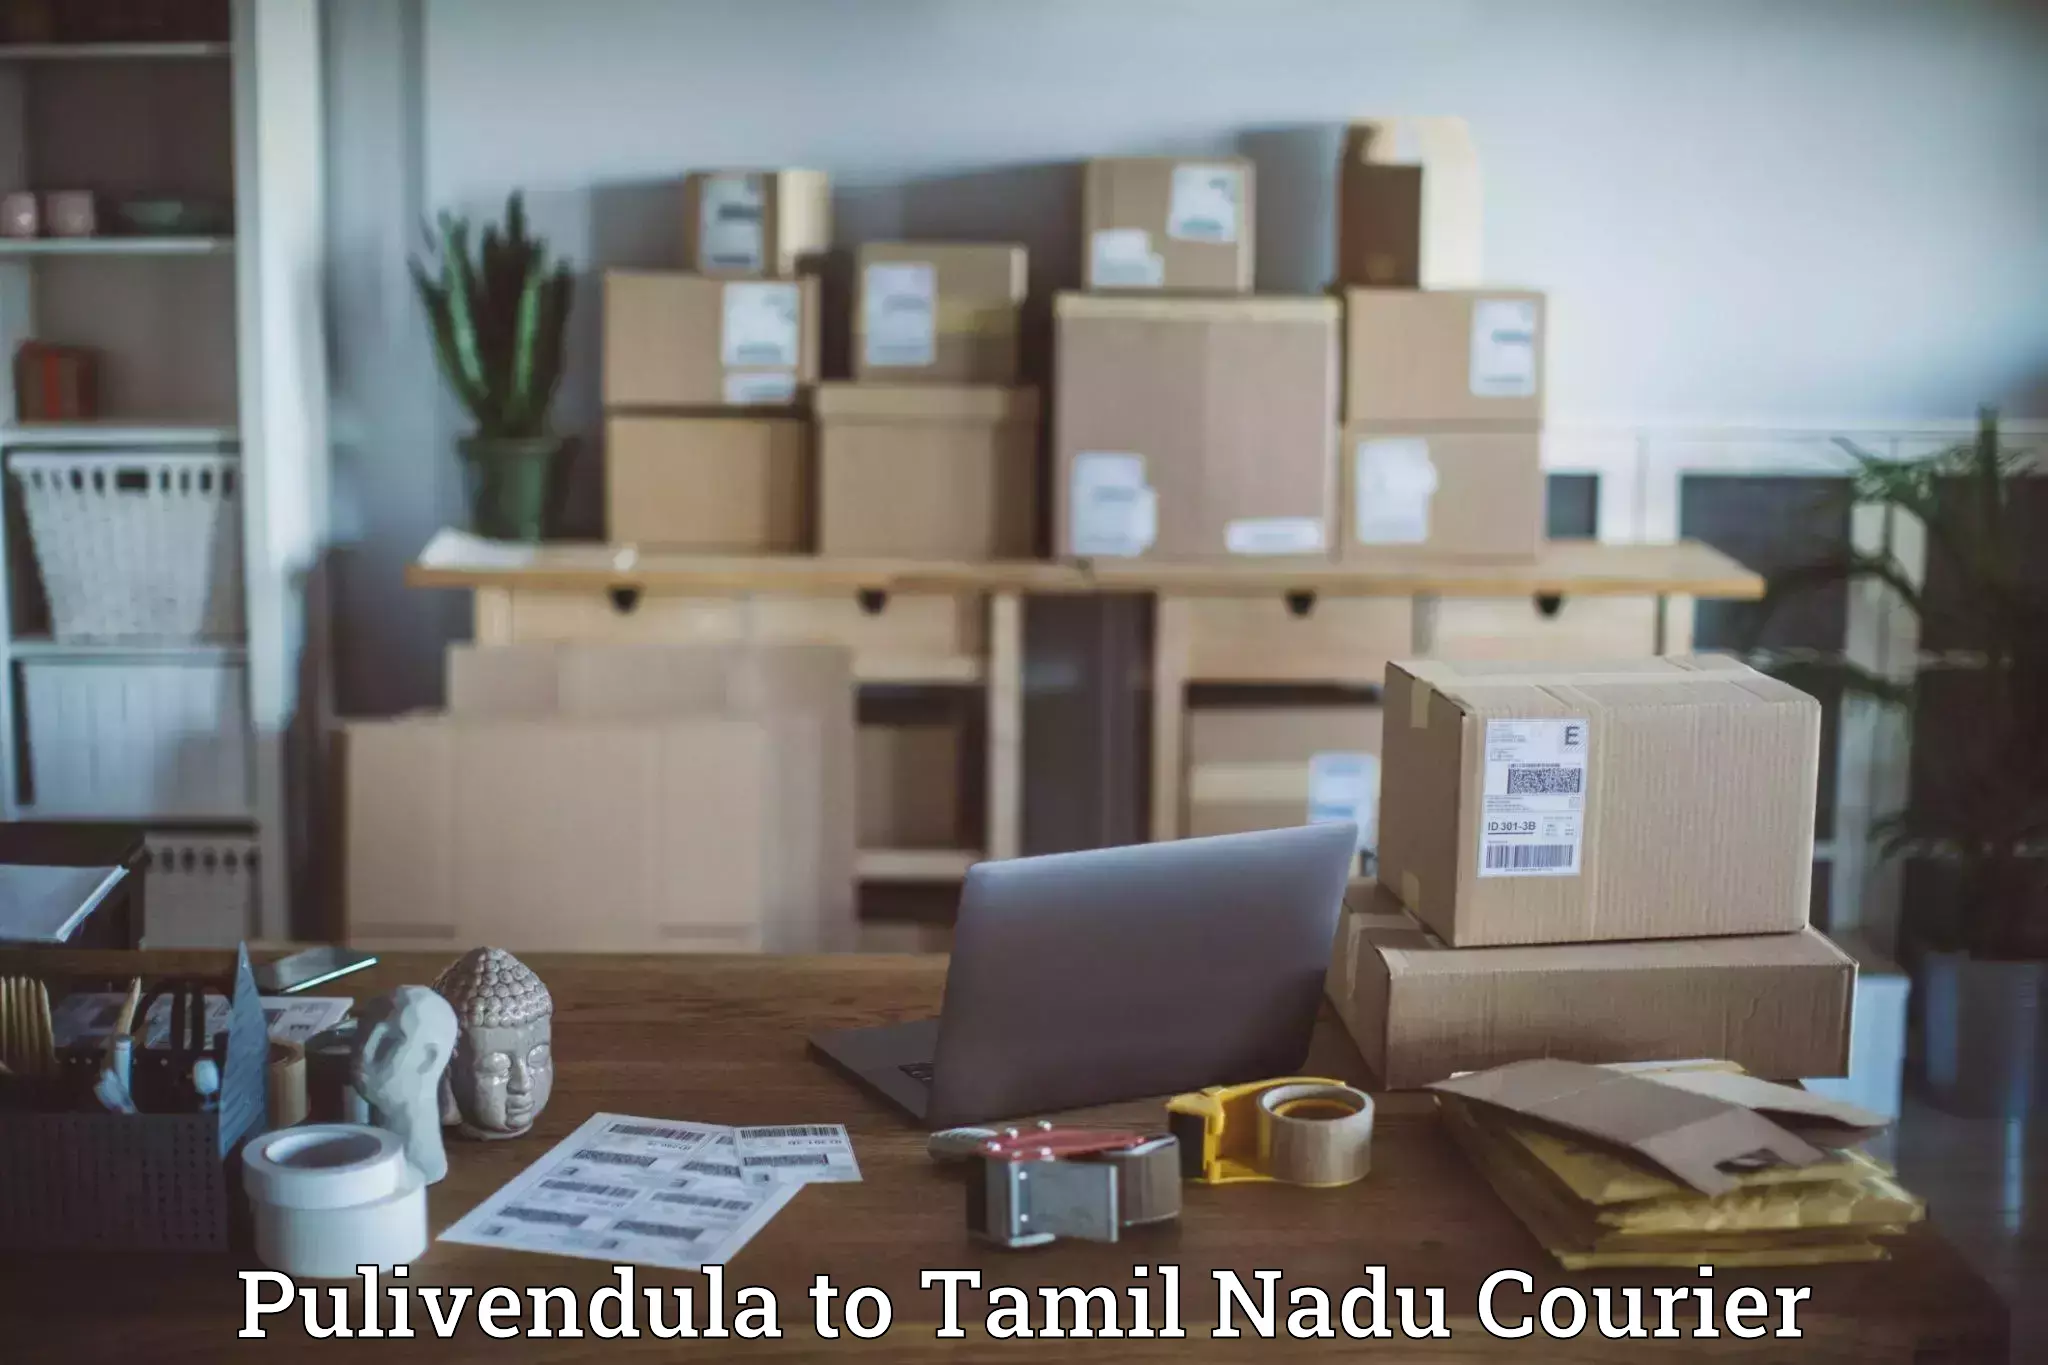 Multi-national courier services Pulivendula to Chennai Port